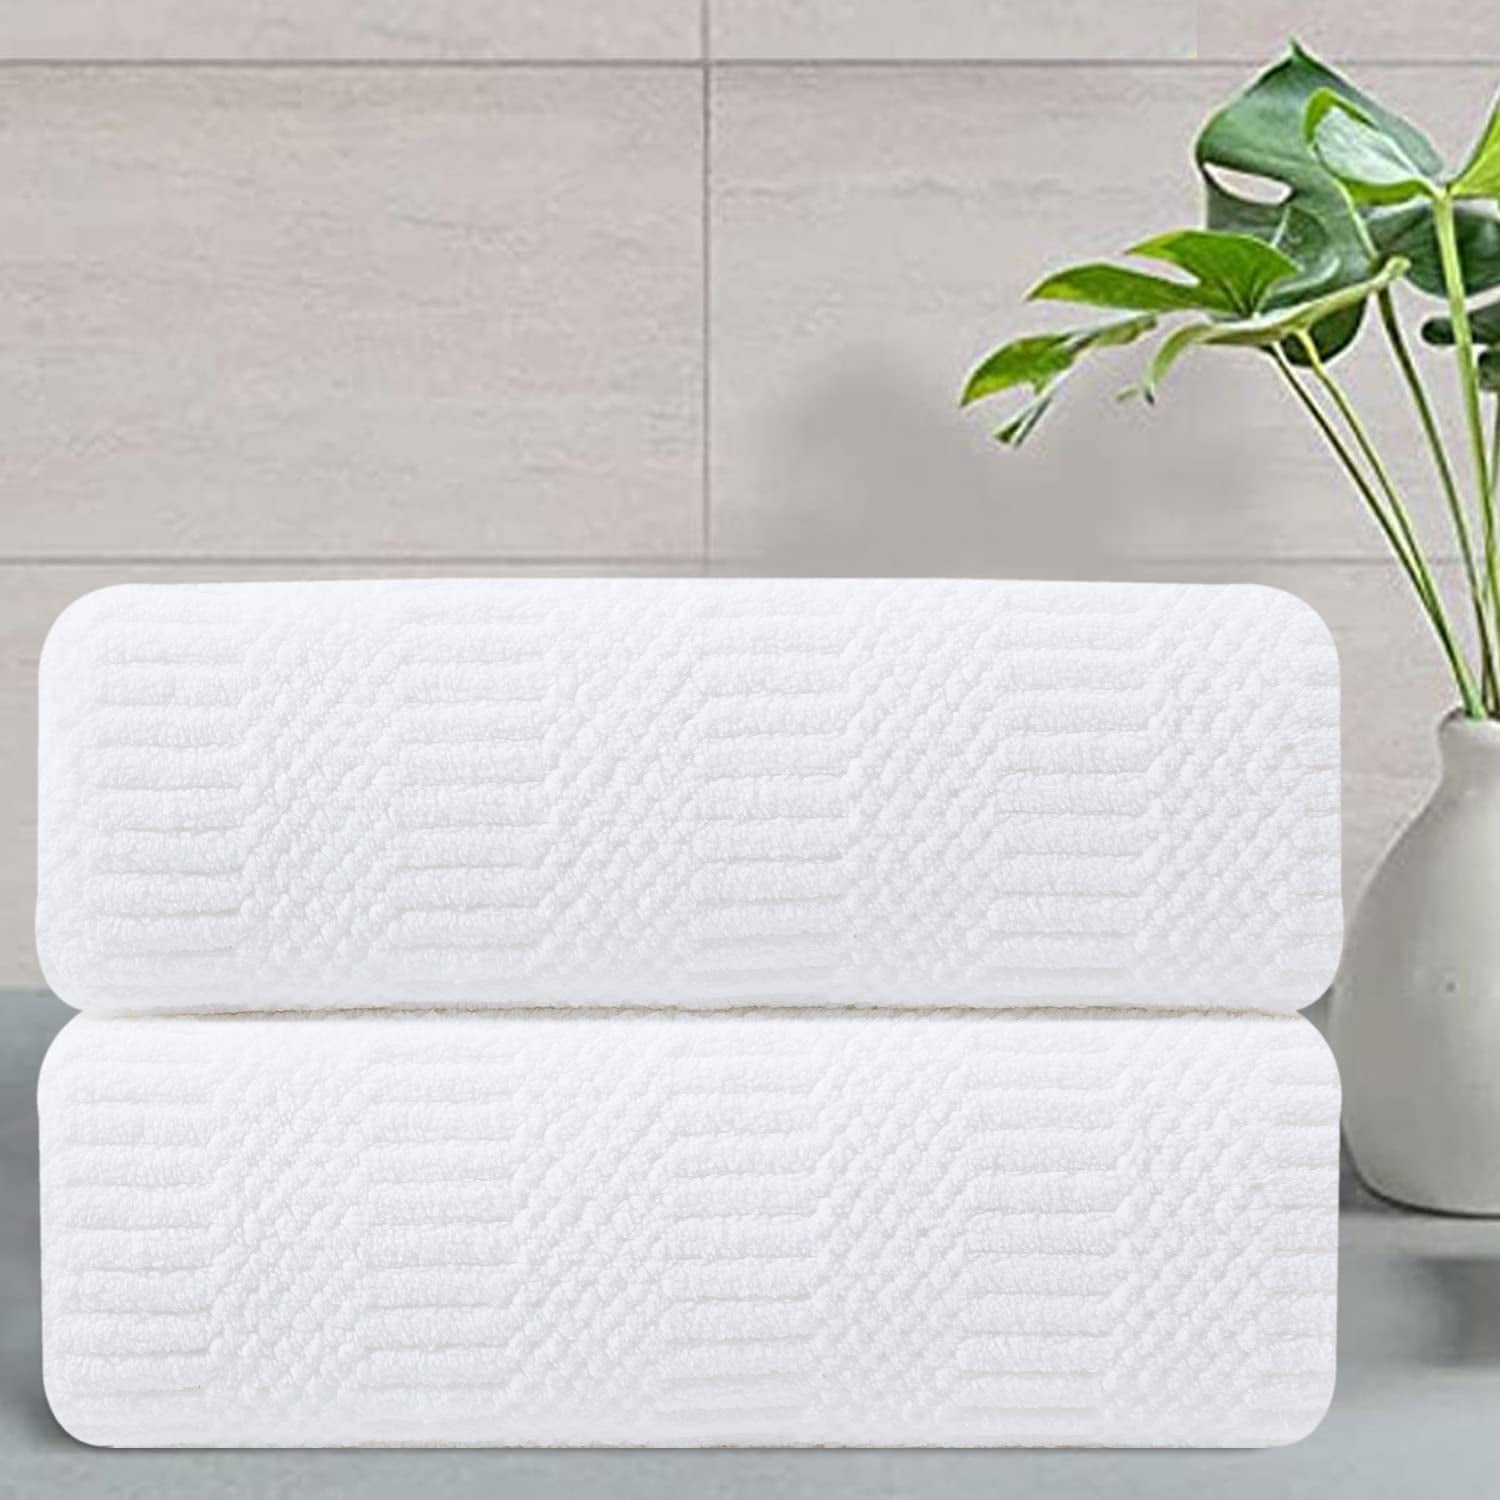 PUPOPIK Hand Towels for Bathroom 2 Pack-100% Cotton Hand Towel (14 x 30  Inch), Highly Absorbent and Quick Dry Face Washcloth, Home Soft Premium  Towel